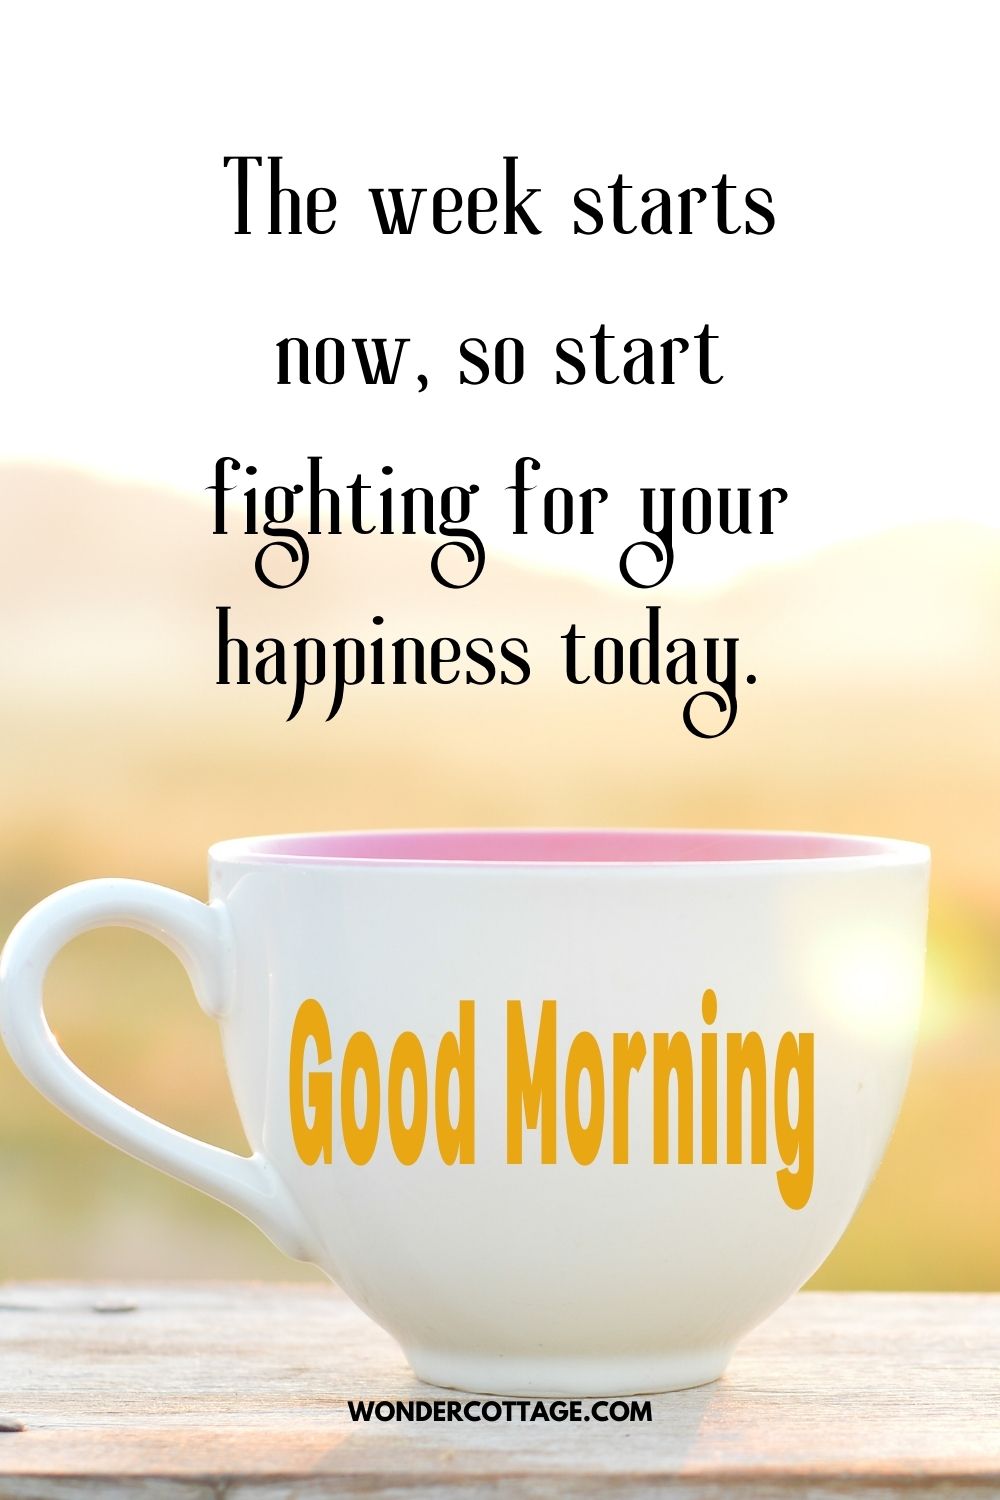 The week starts now, so start fighting for your happiness today. Good Morning